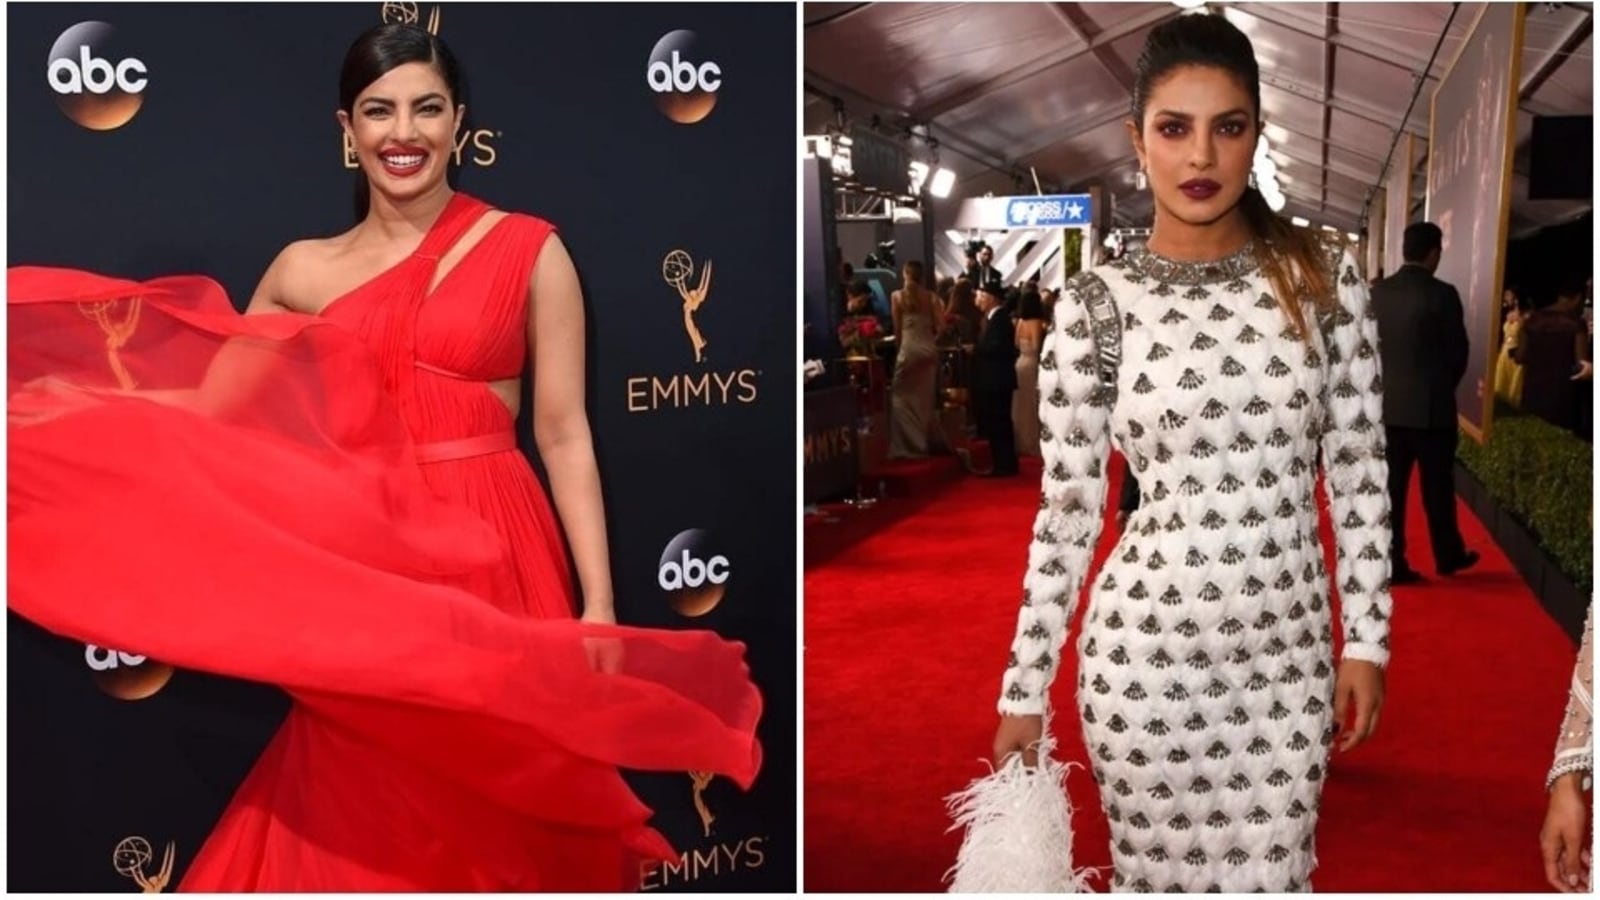 Emmys 2022: The Best Dressed Stars on the Red Carpet